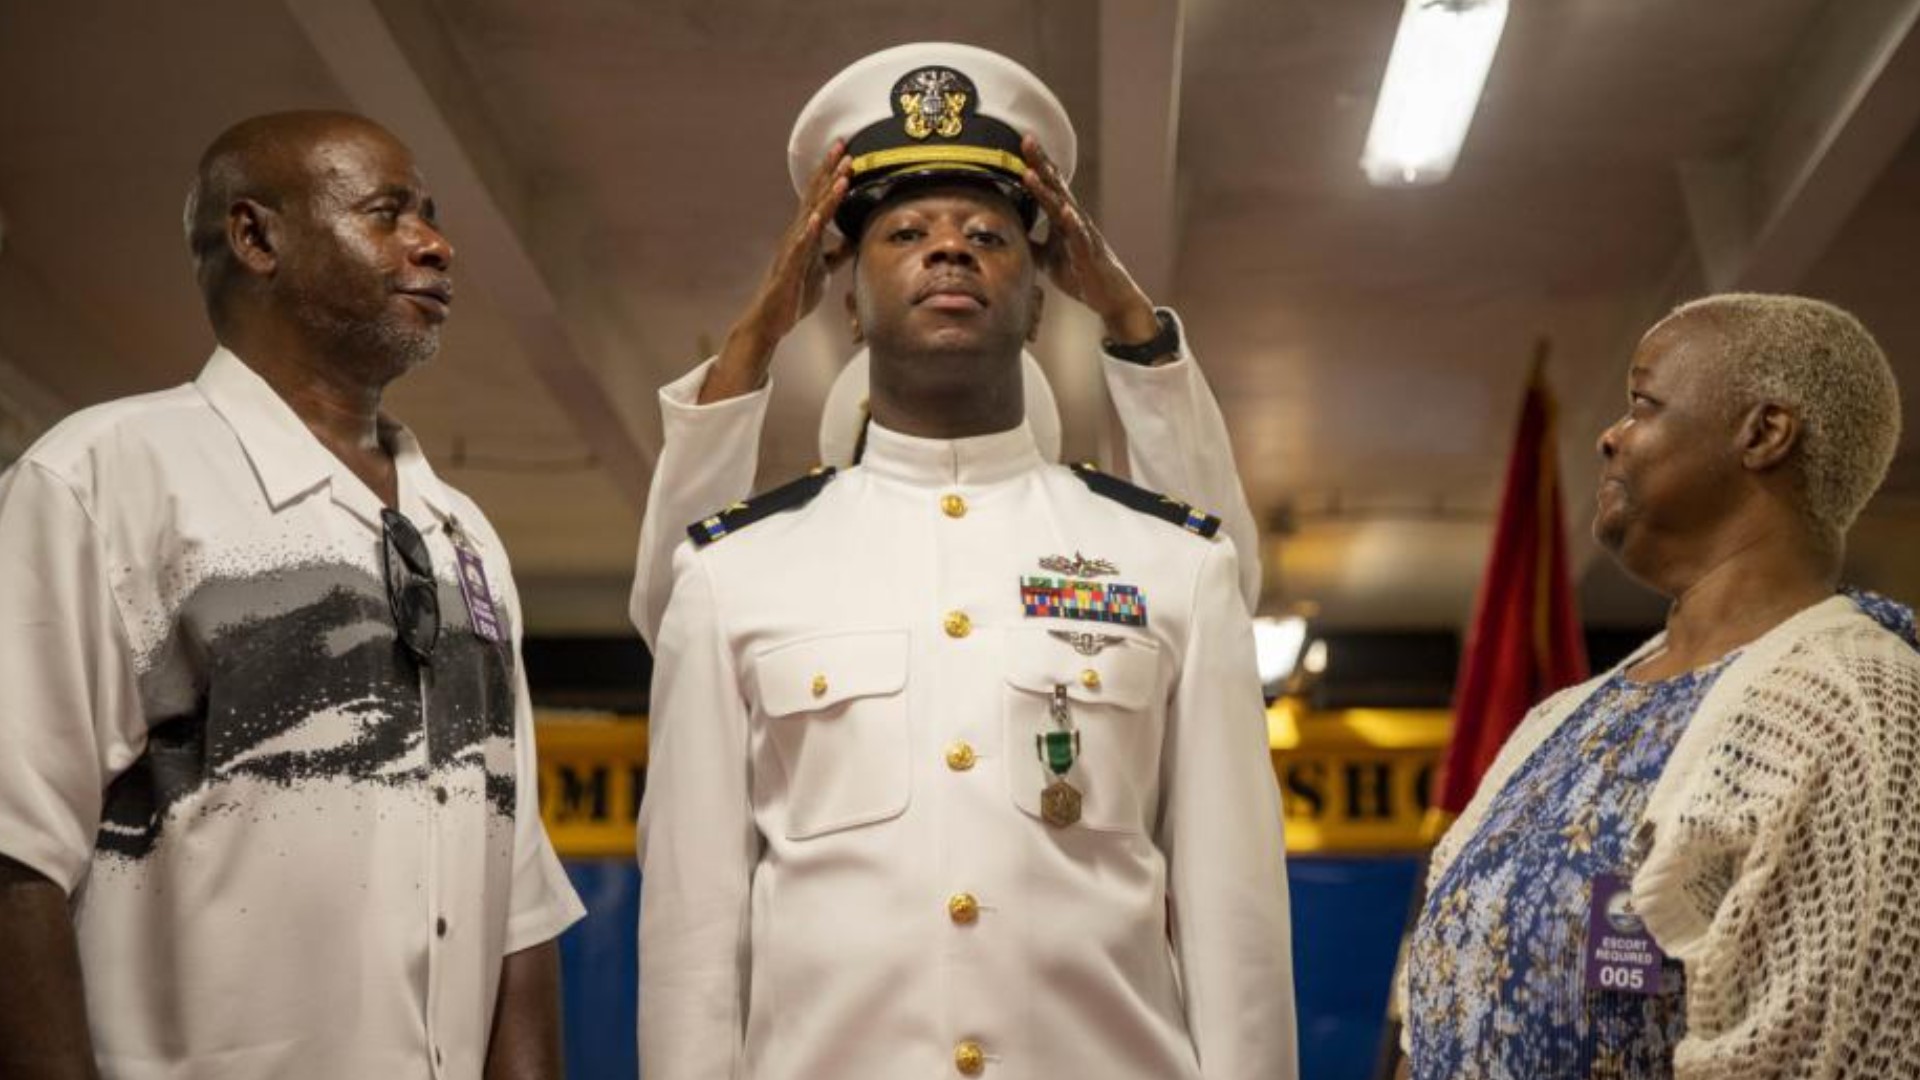 The Navy is launching a new ambassador program, which taps into the nation's Historically Black Colleges and Universities.